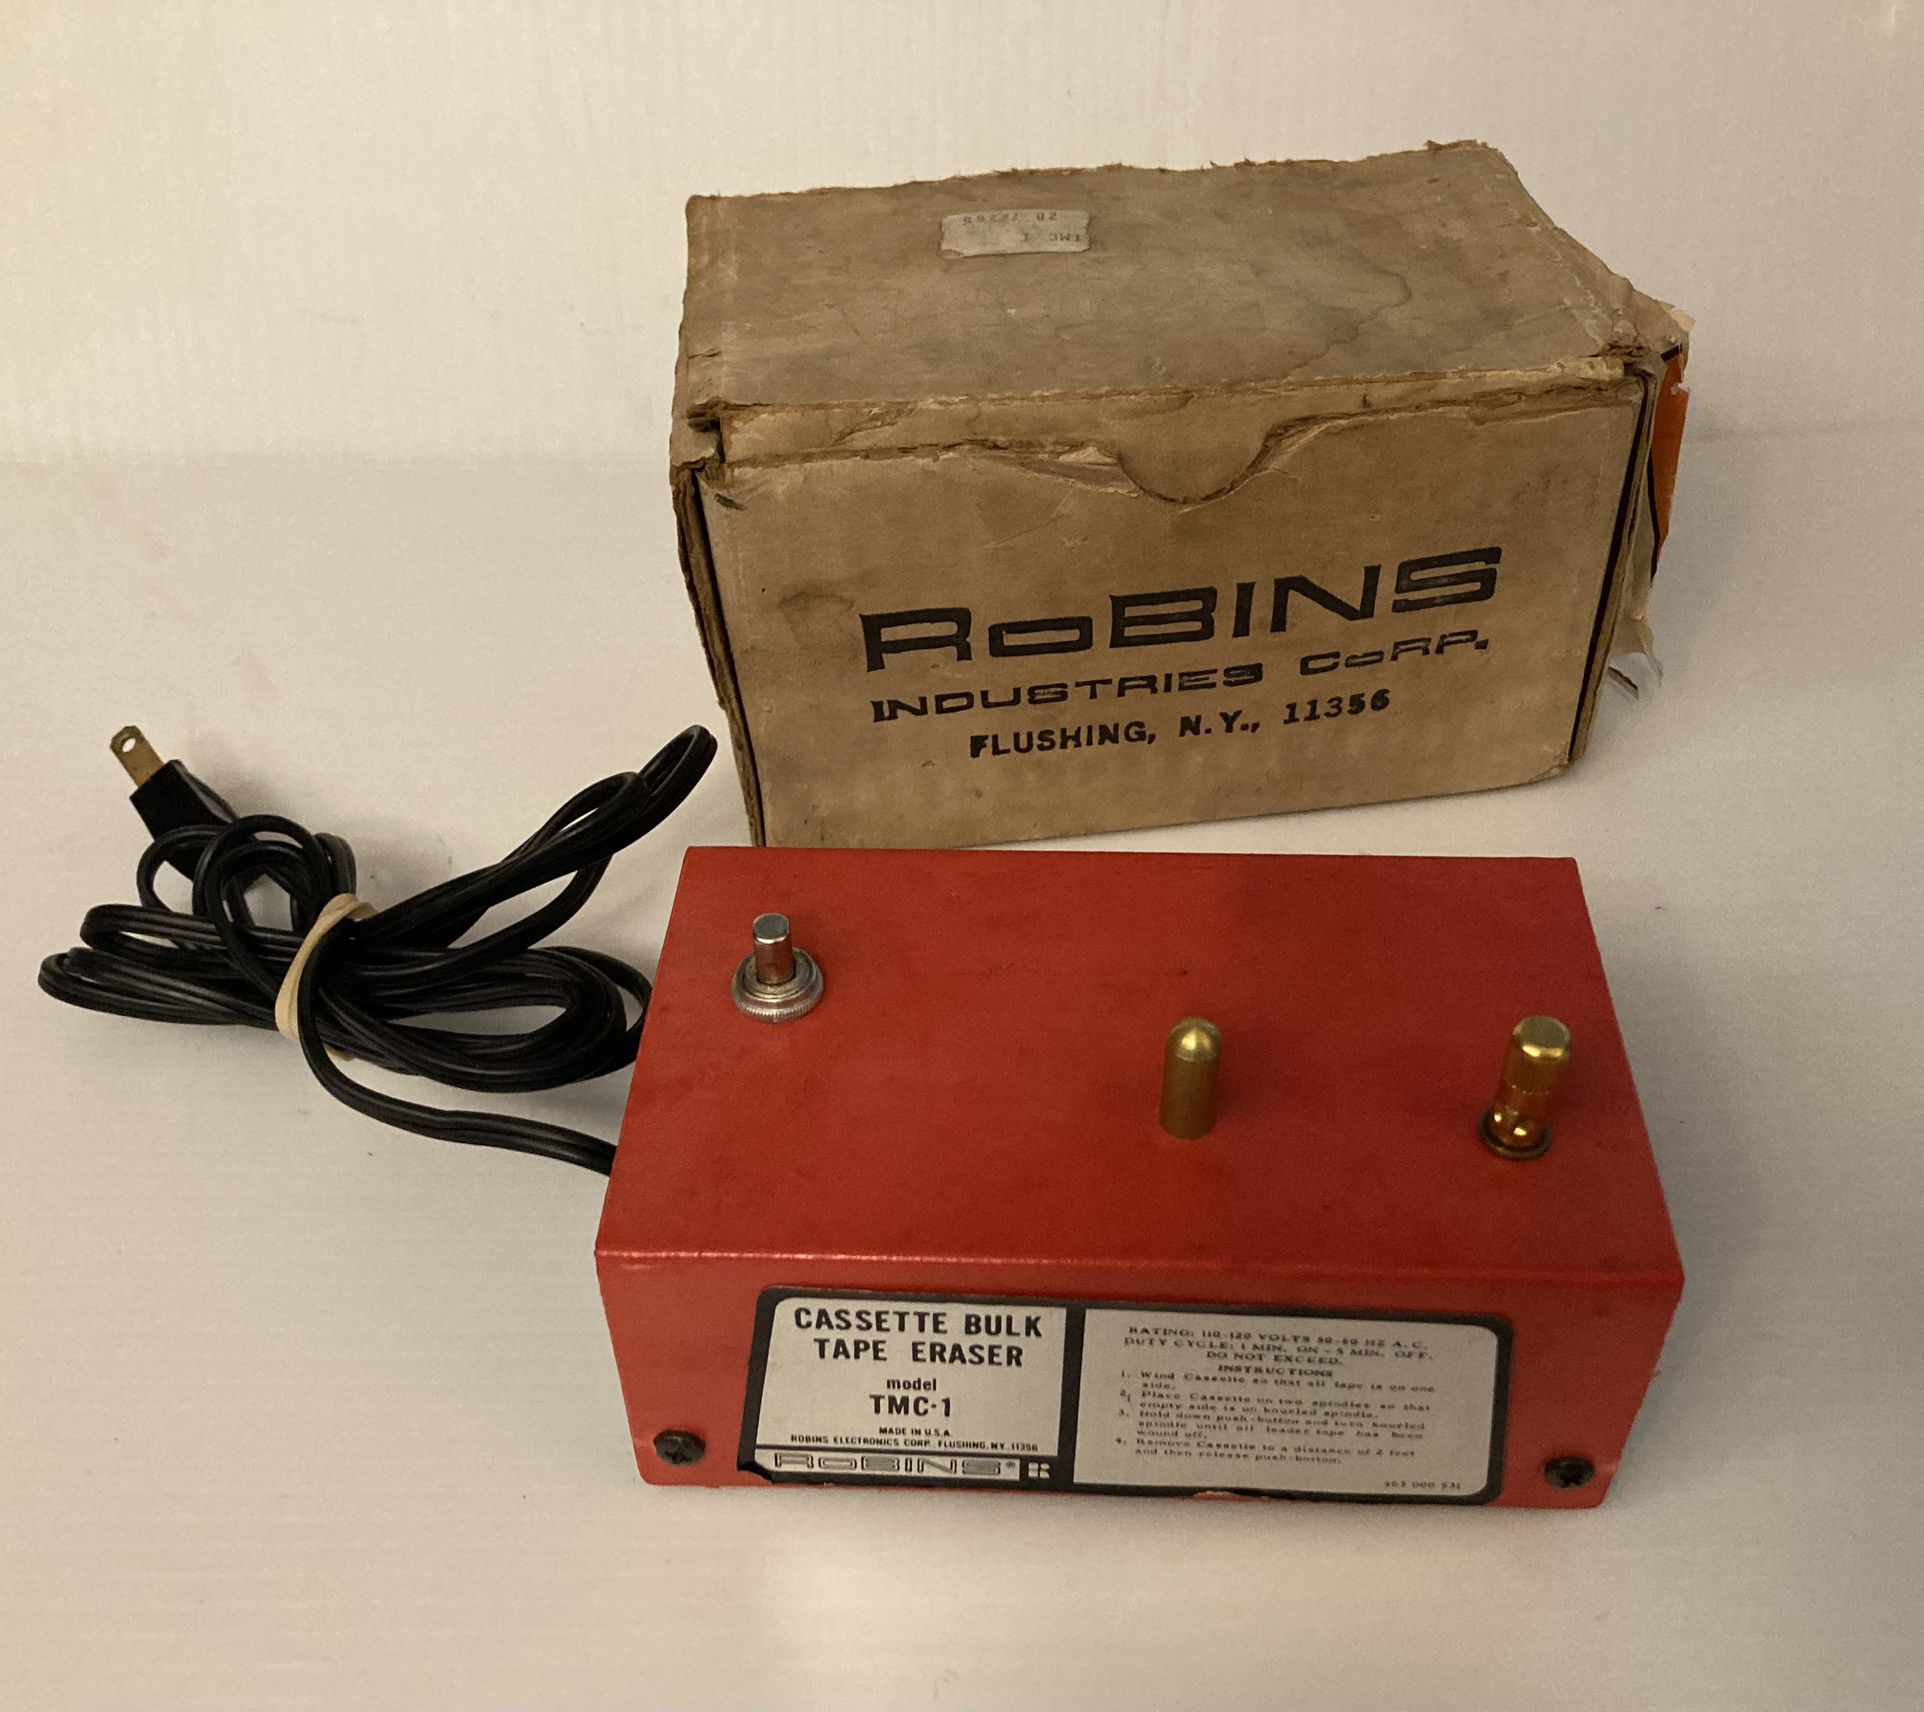 Vintage Robins Industries Corp Bulk Cassette Tape Eraser Made In USA TMC-1 . With box. Tested, working